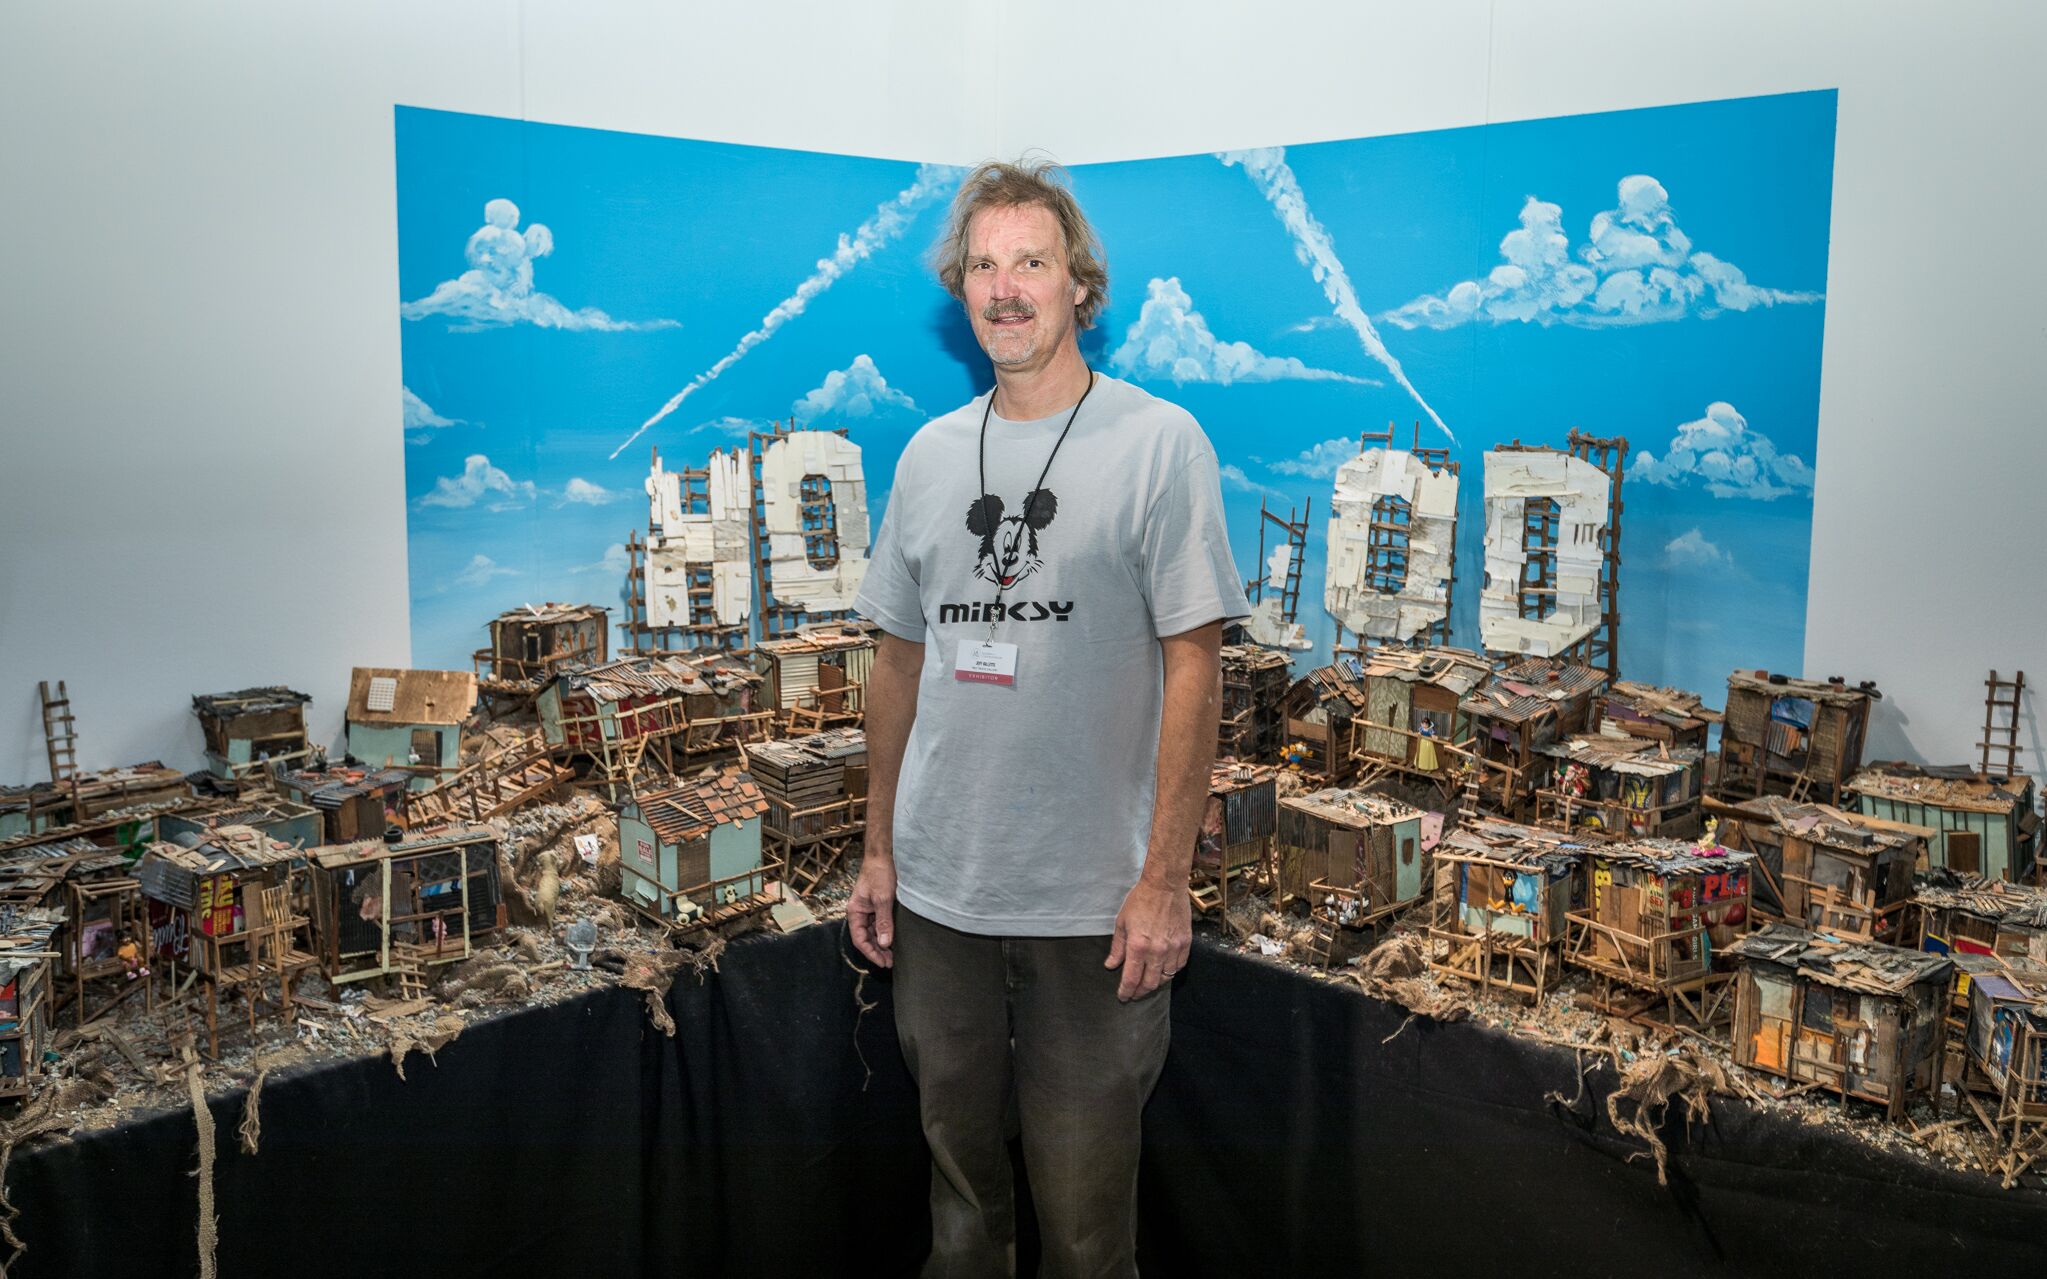 Jeff Gilette in front of his installation "ho